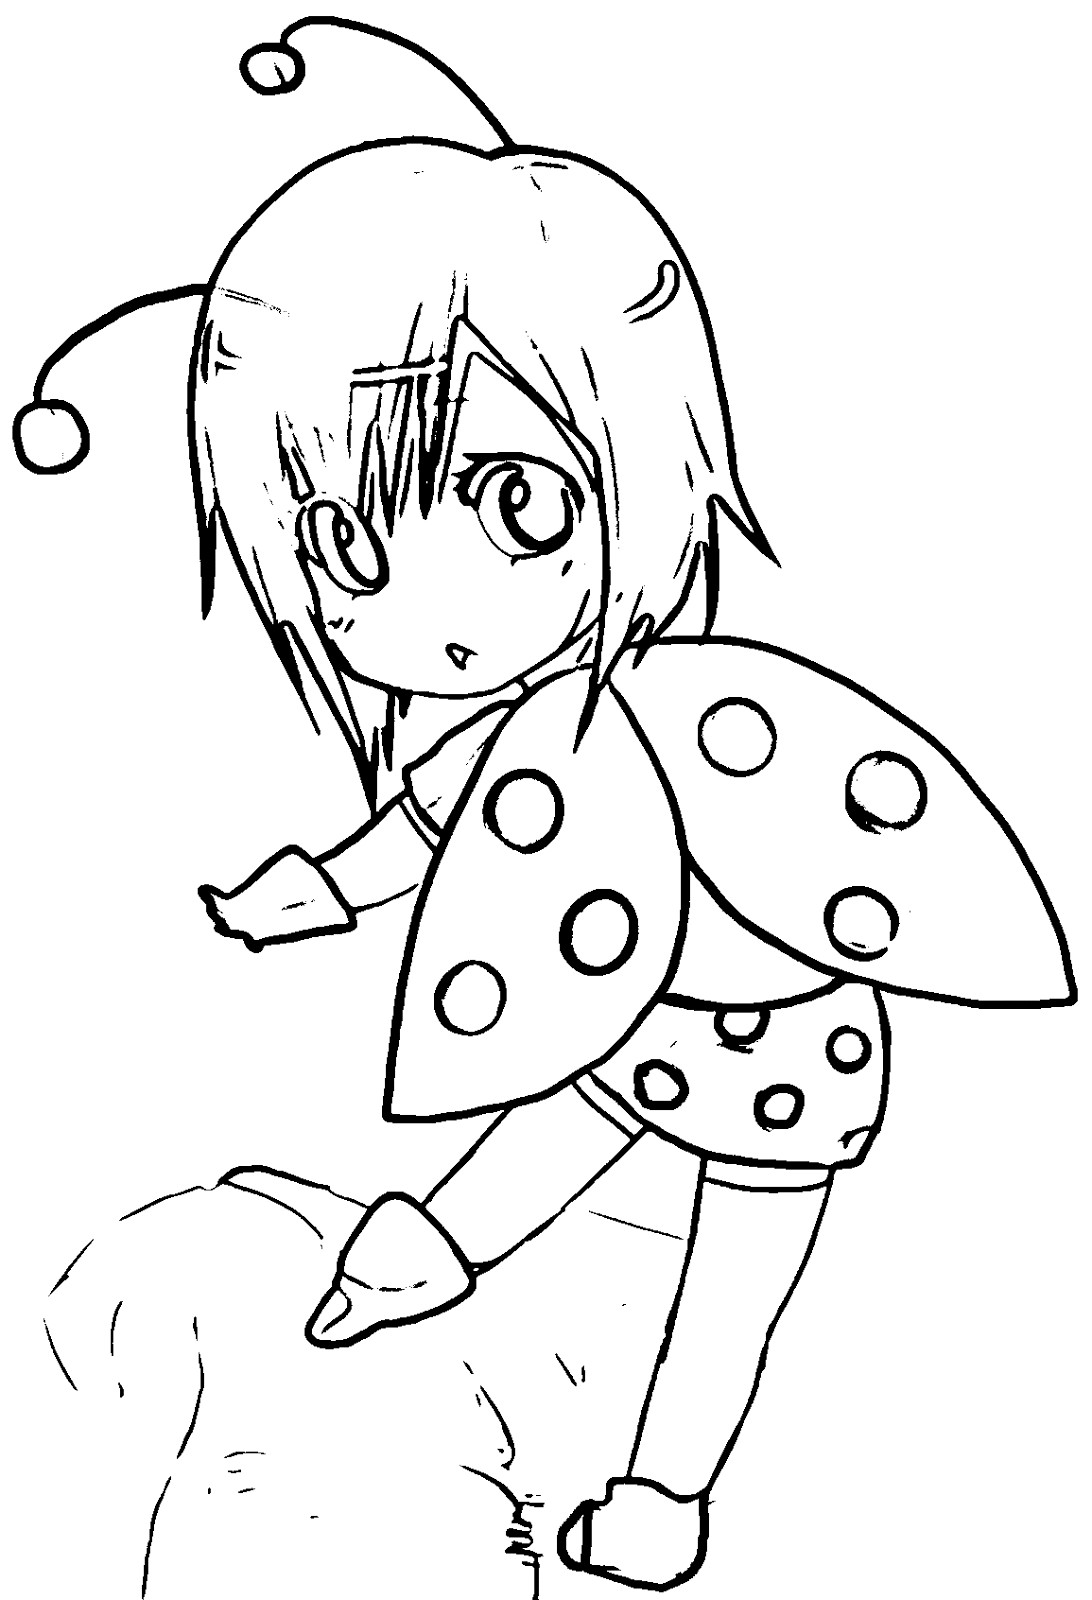 Ladybug Girl Coloring Pages
 Ladybug Girl Coloring Pages